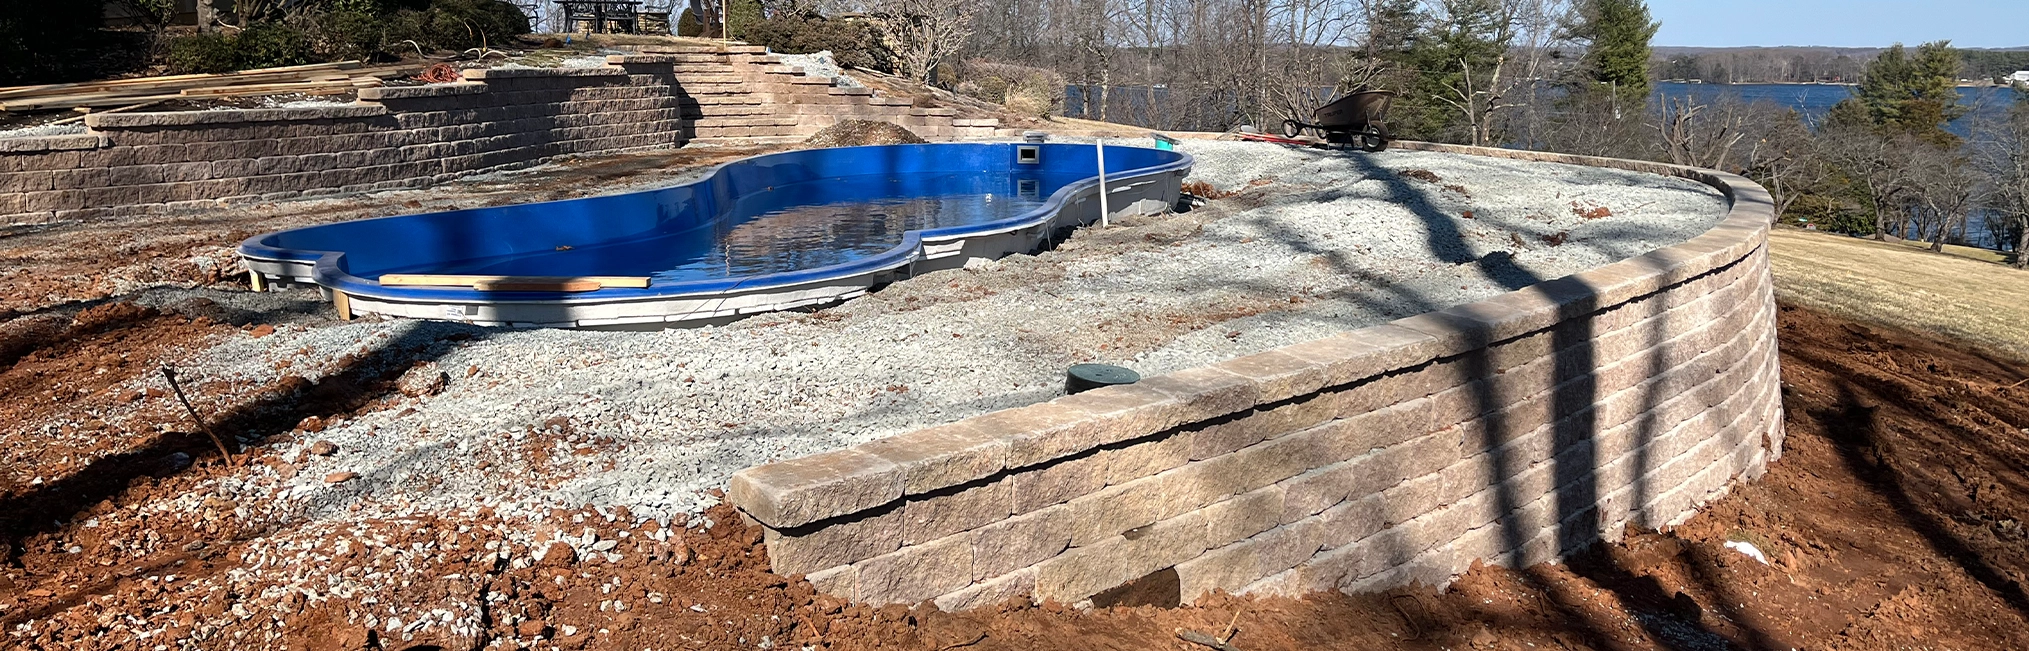 Retaining wall holding back a pool